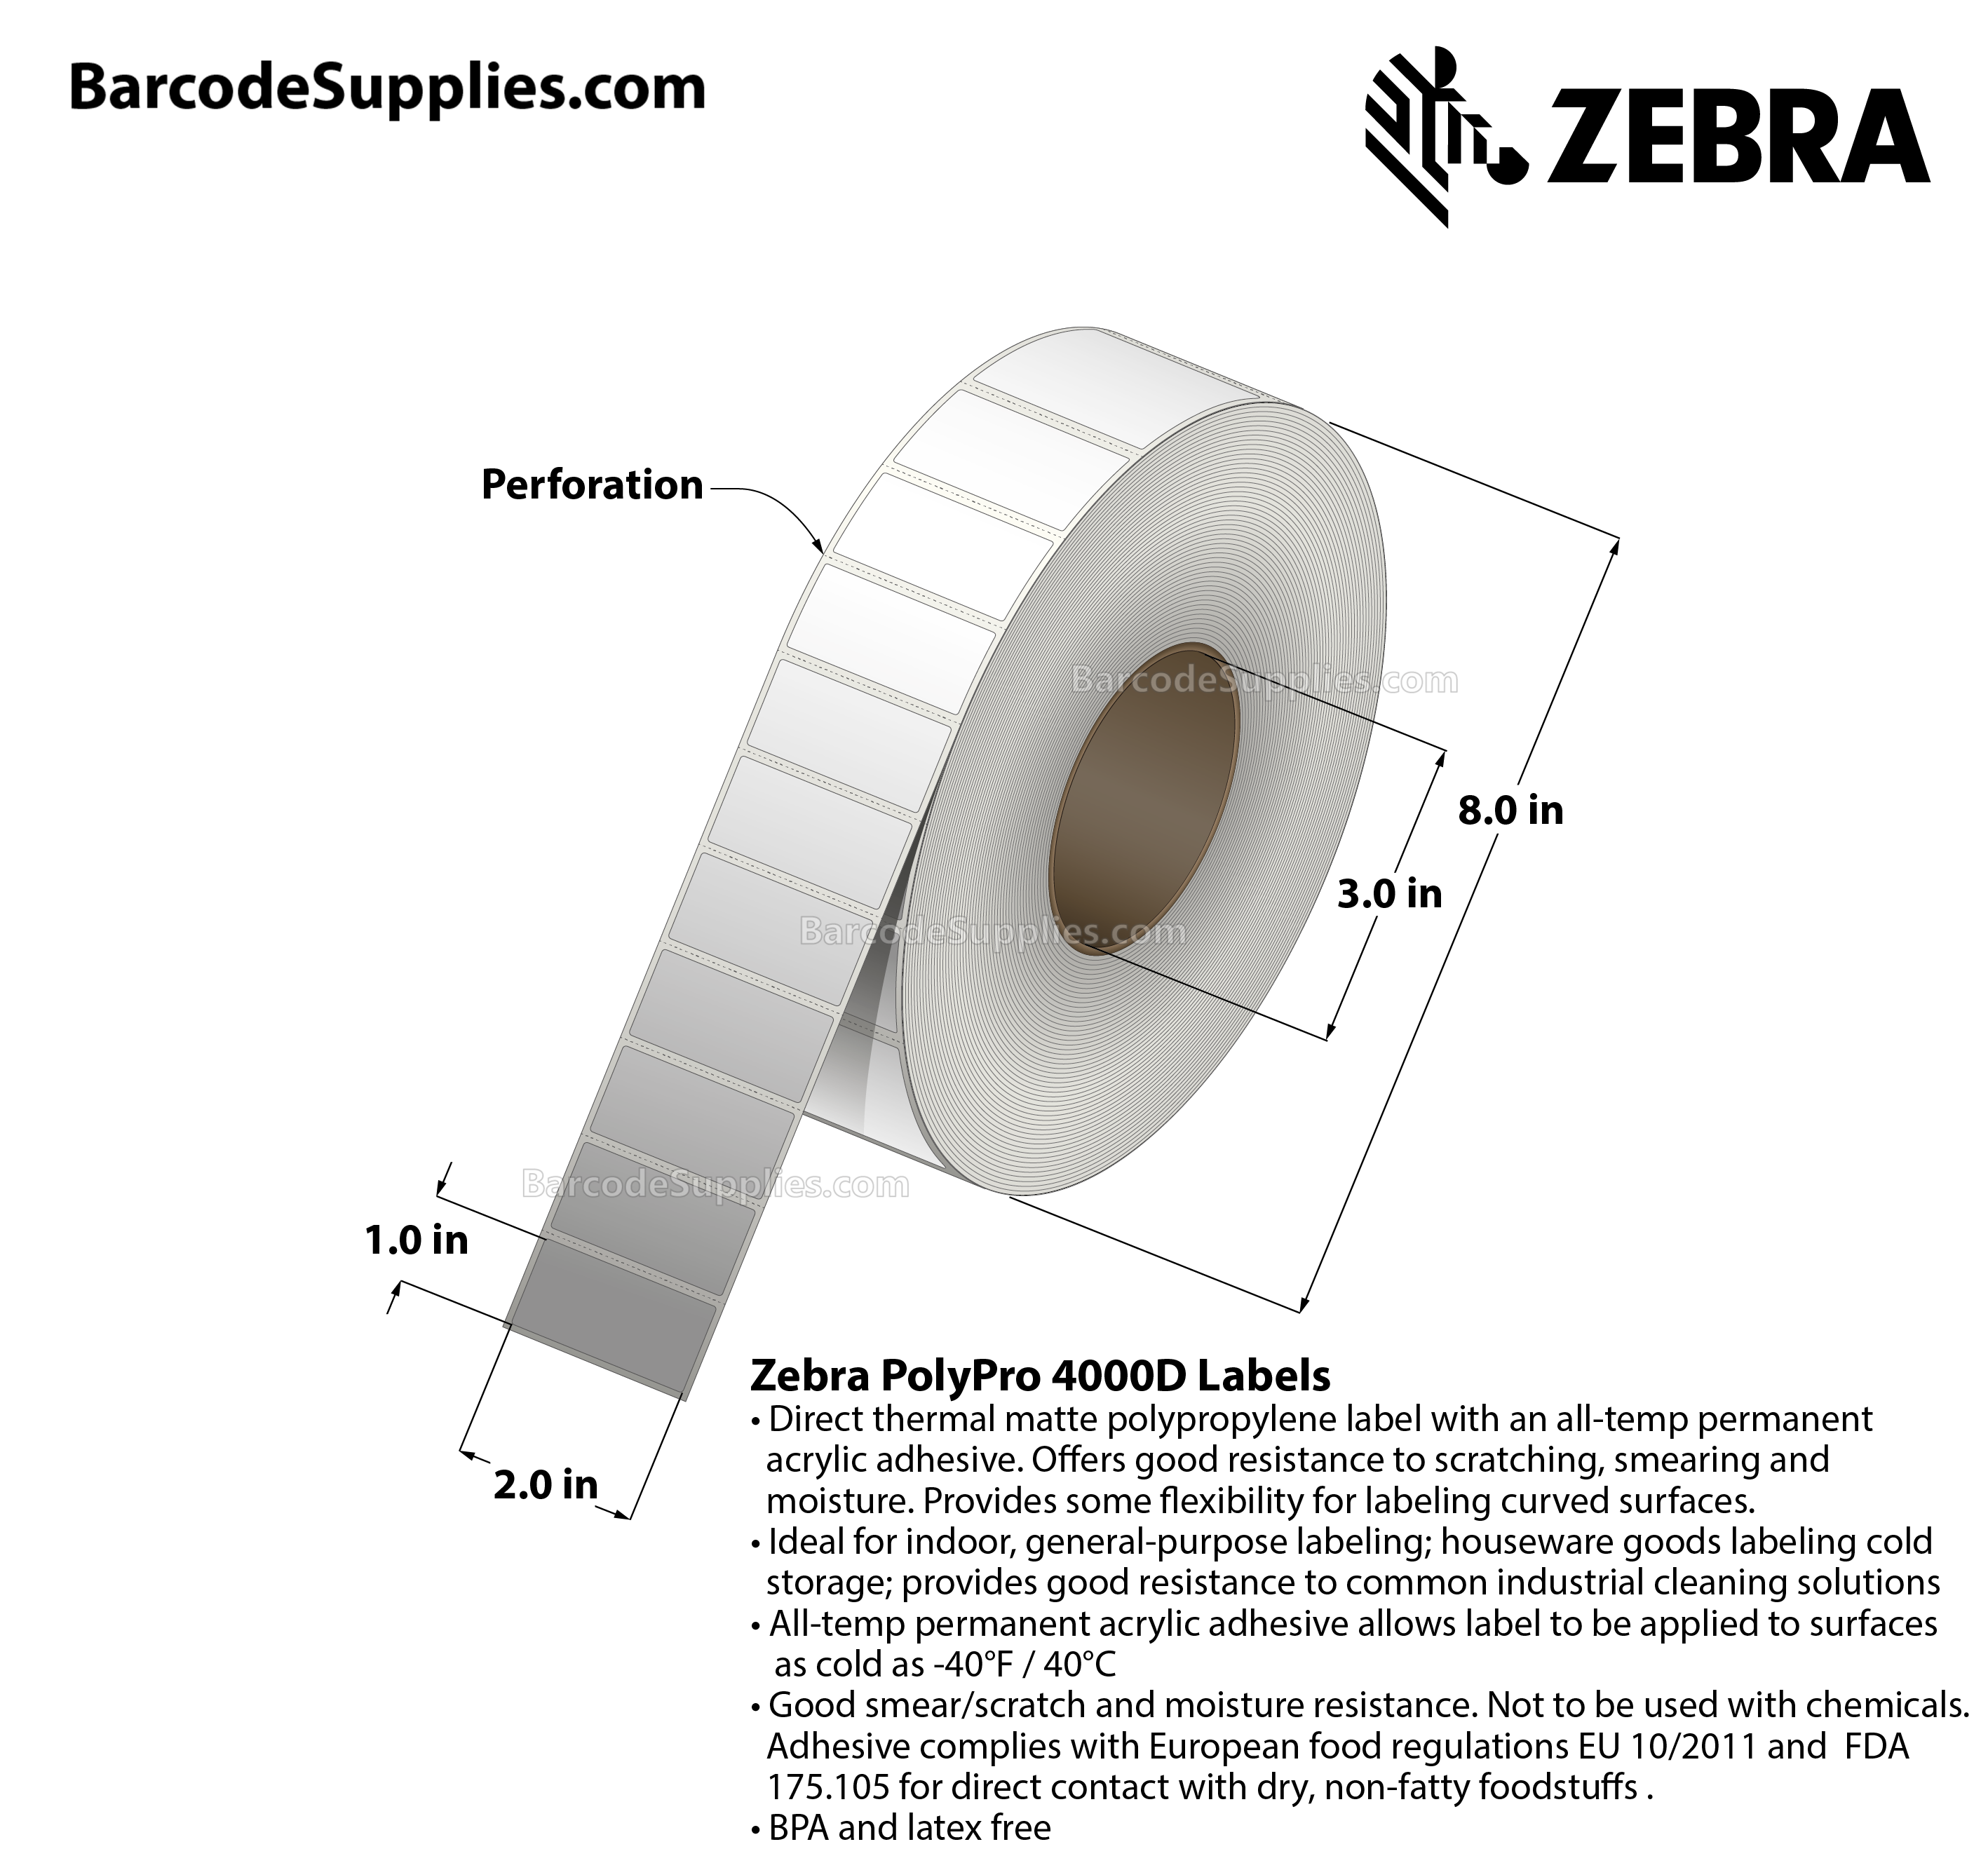 2 x 1 Direct Thermal White PolyPro 4000D Labels With Permanent Adhesive - Perforated - 6000 Labels Per Roll - Carton Of 6 Rolls - 36000 Labels Total - MPN: 10028316